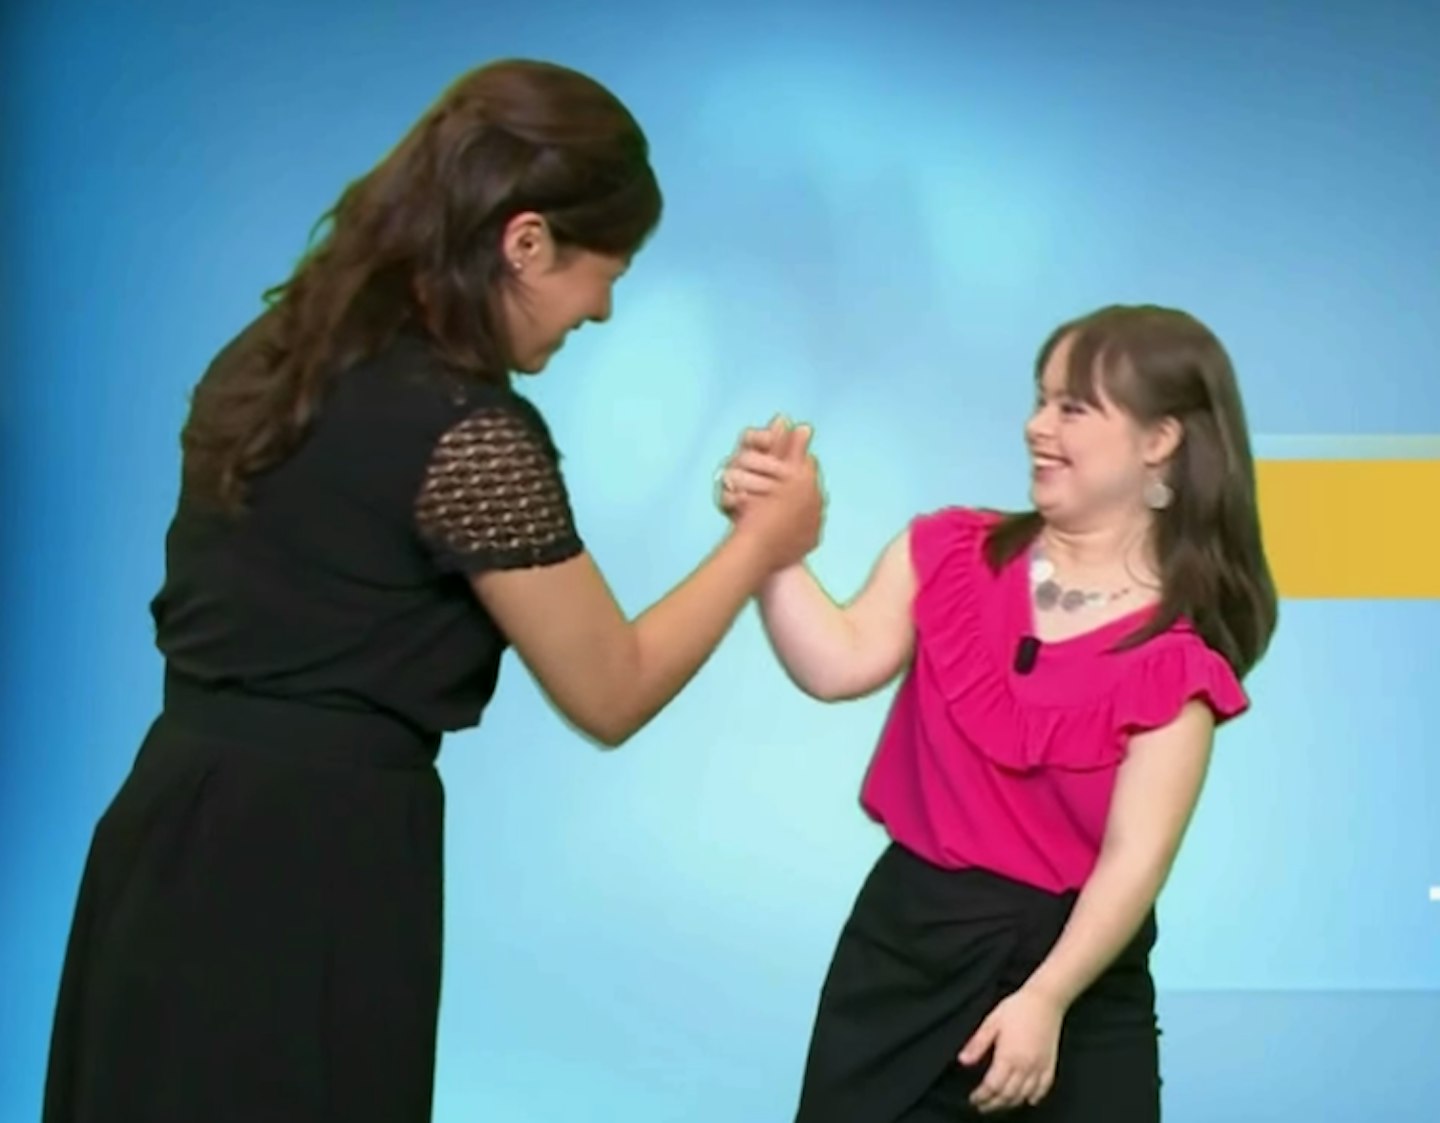 downs-syndrome-woman-dream-presenting-weather-reality-facebook-campaign-melanie-segard